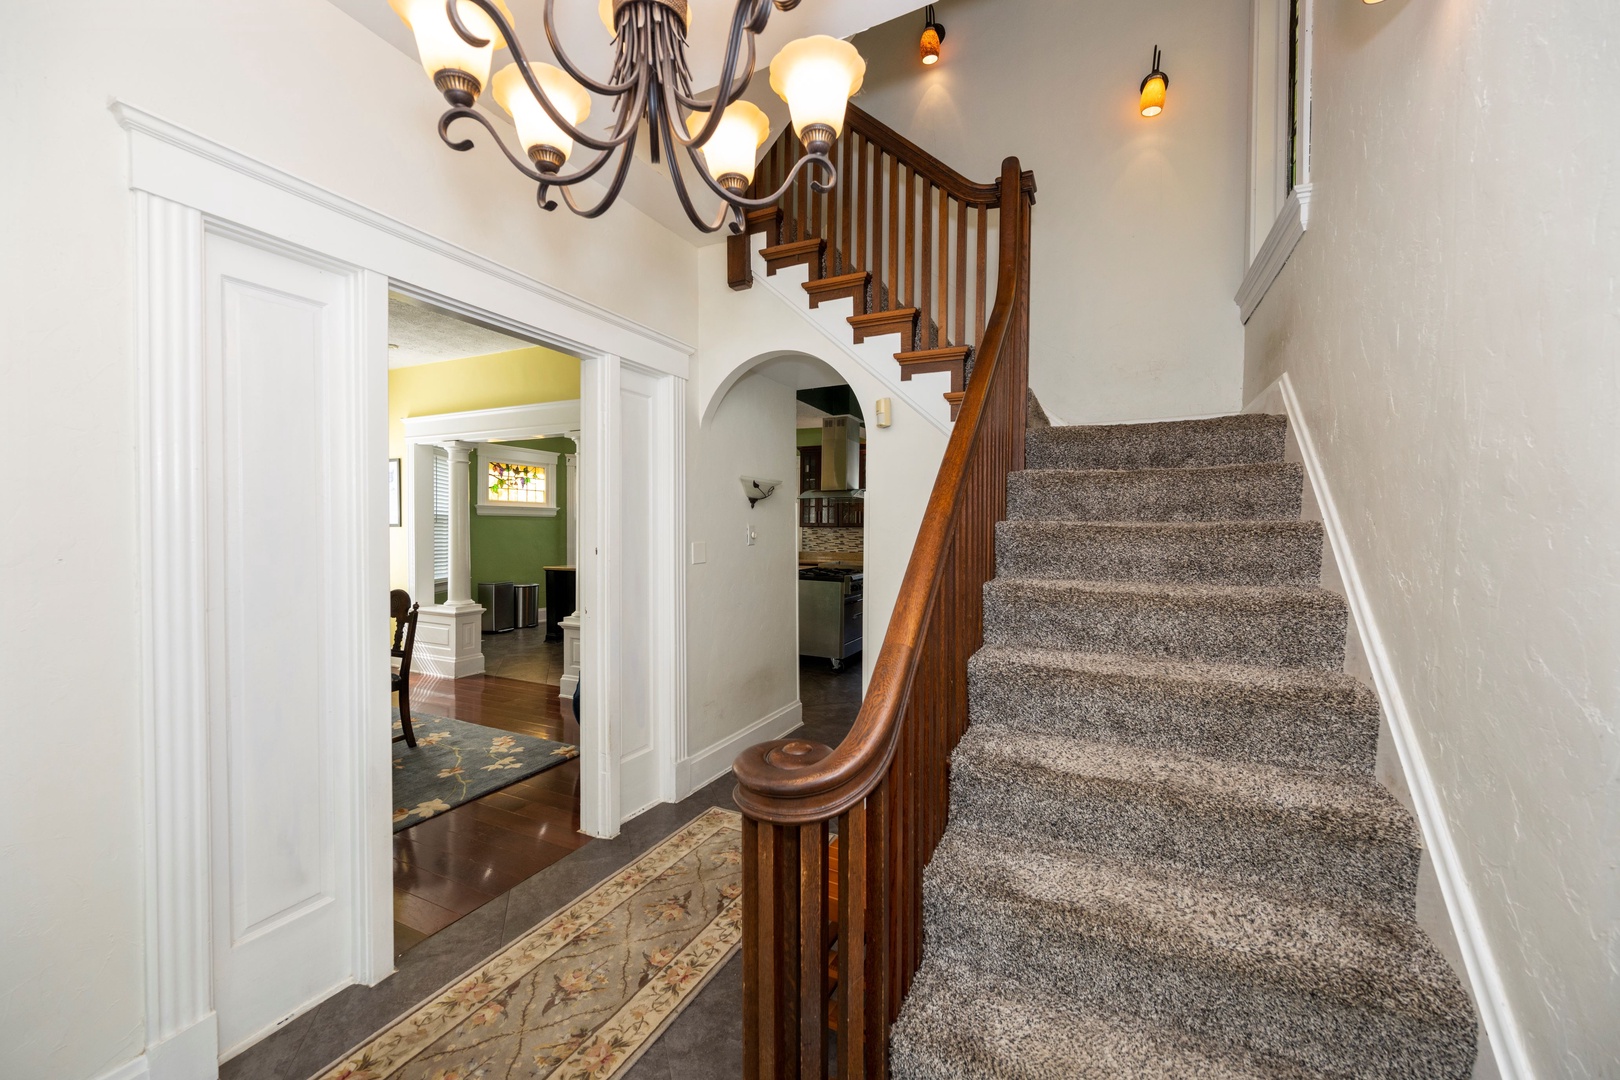 This home boasts updated finishes & gorgeous historical details throughout